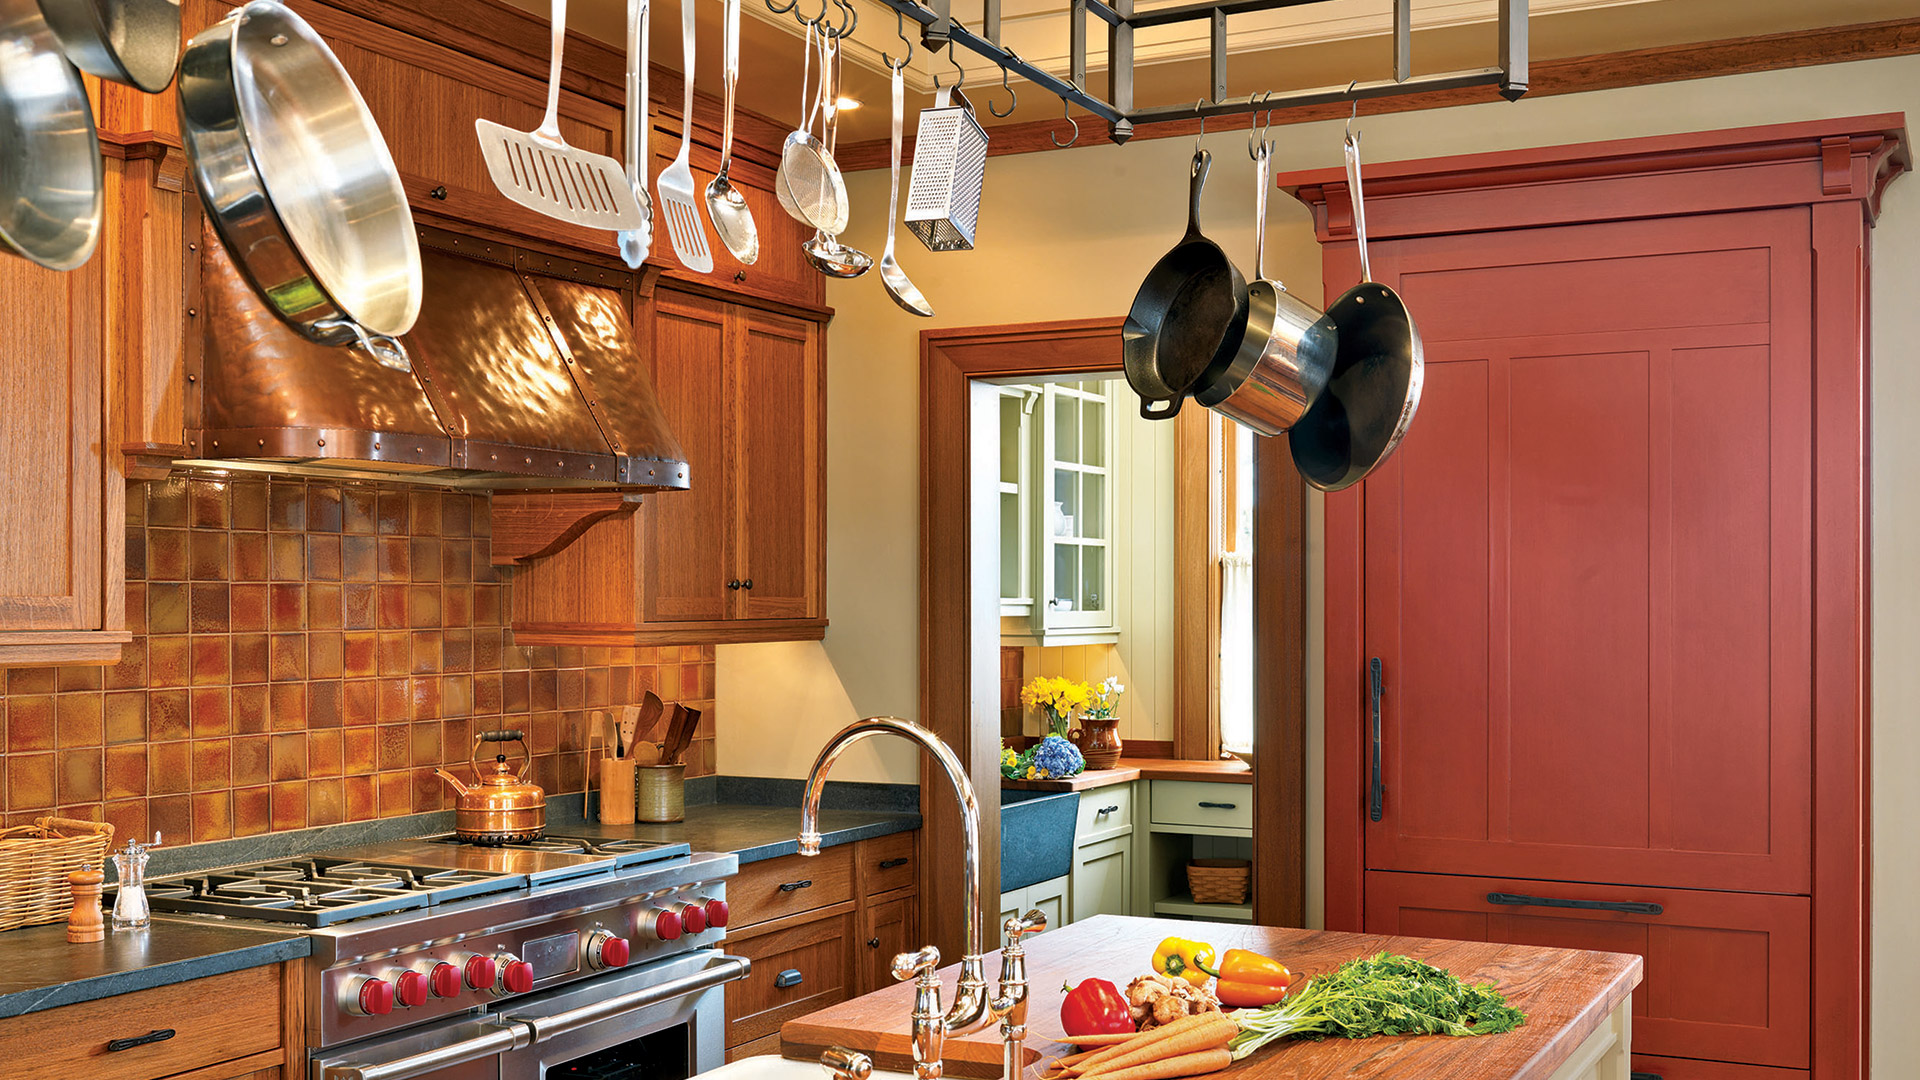 Newport Rhode Island kitchen with gas range and copper hood